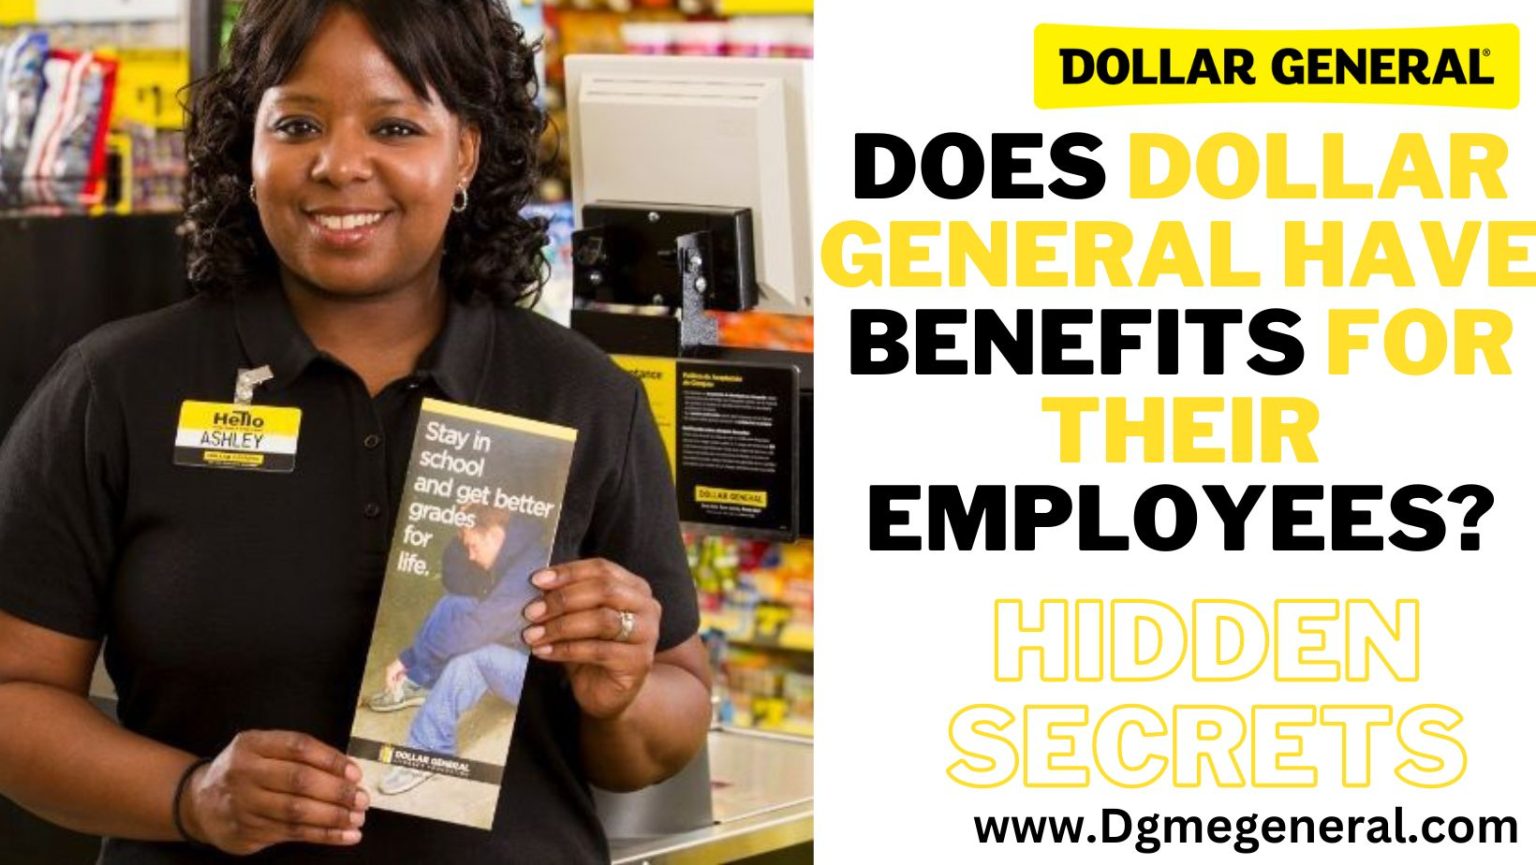 Does Dollar General Have Benefits For Their Employees